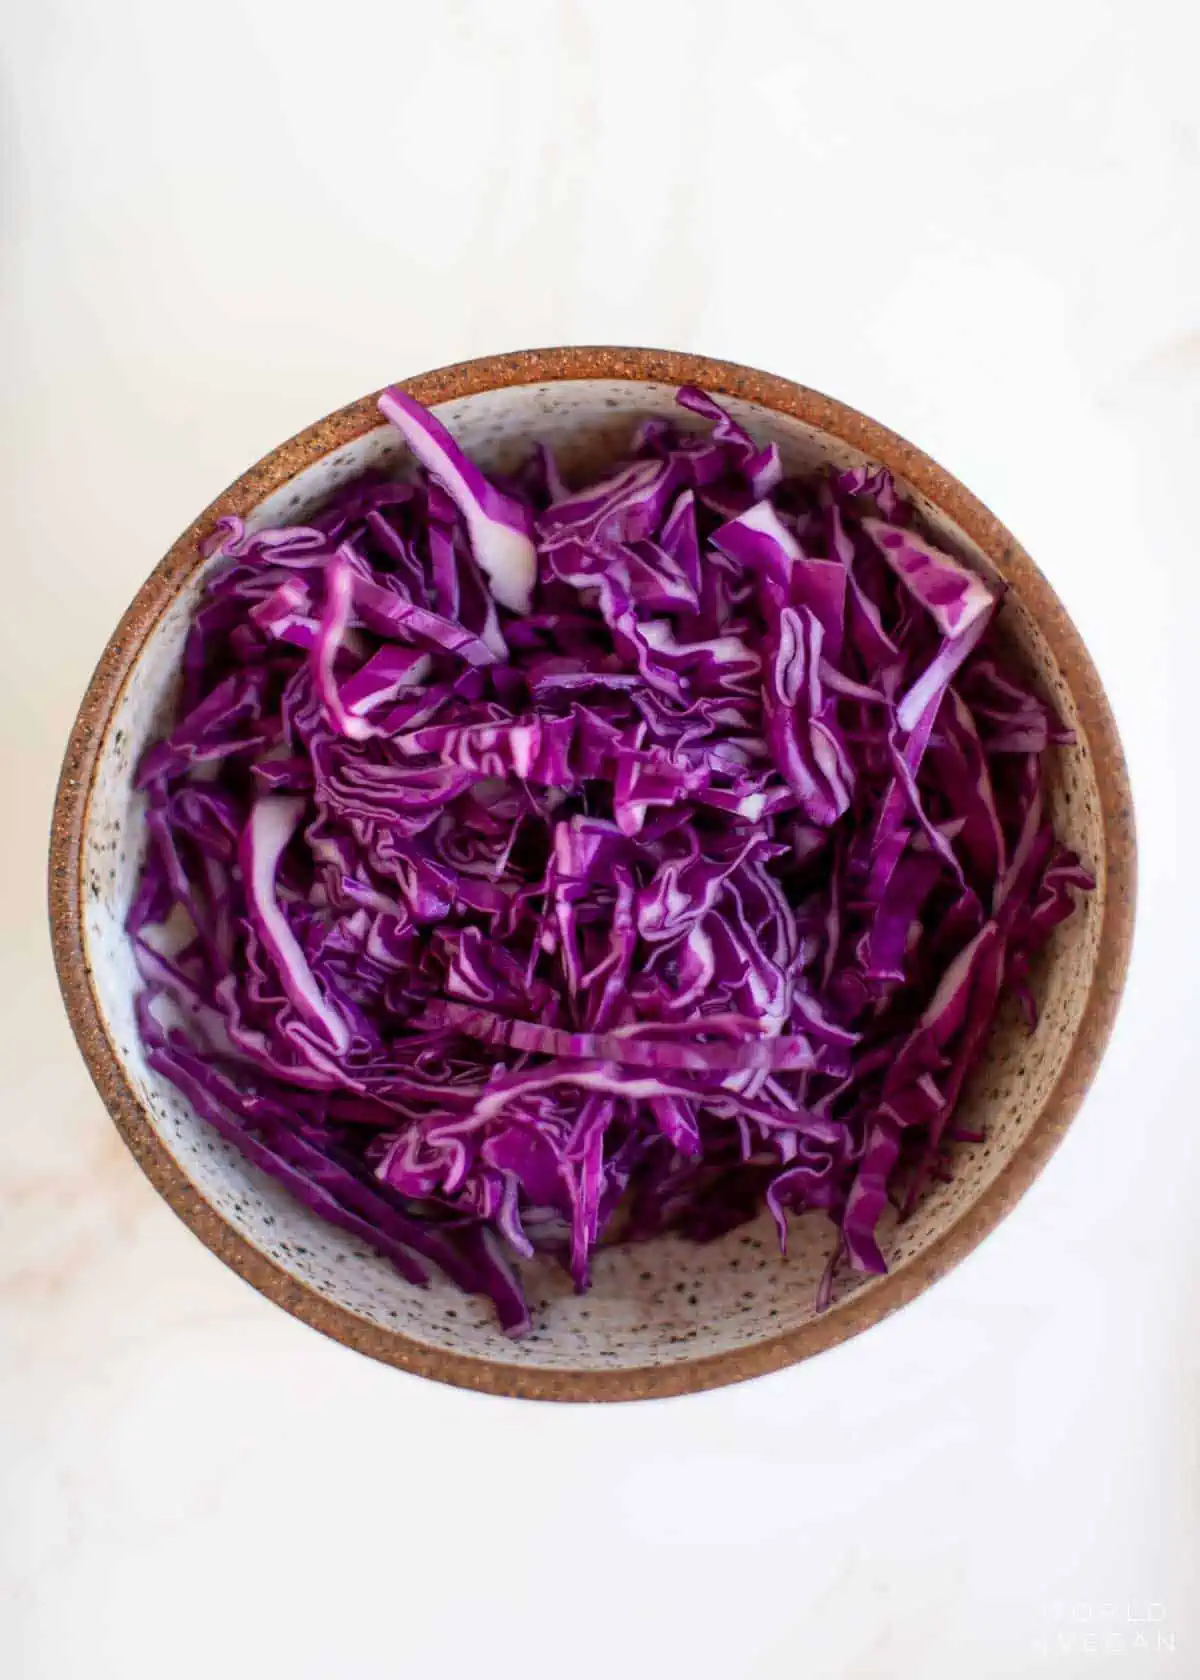 A bowl of shredded purple cabbage.